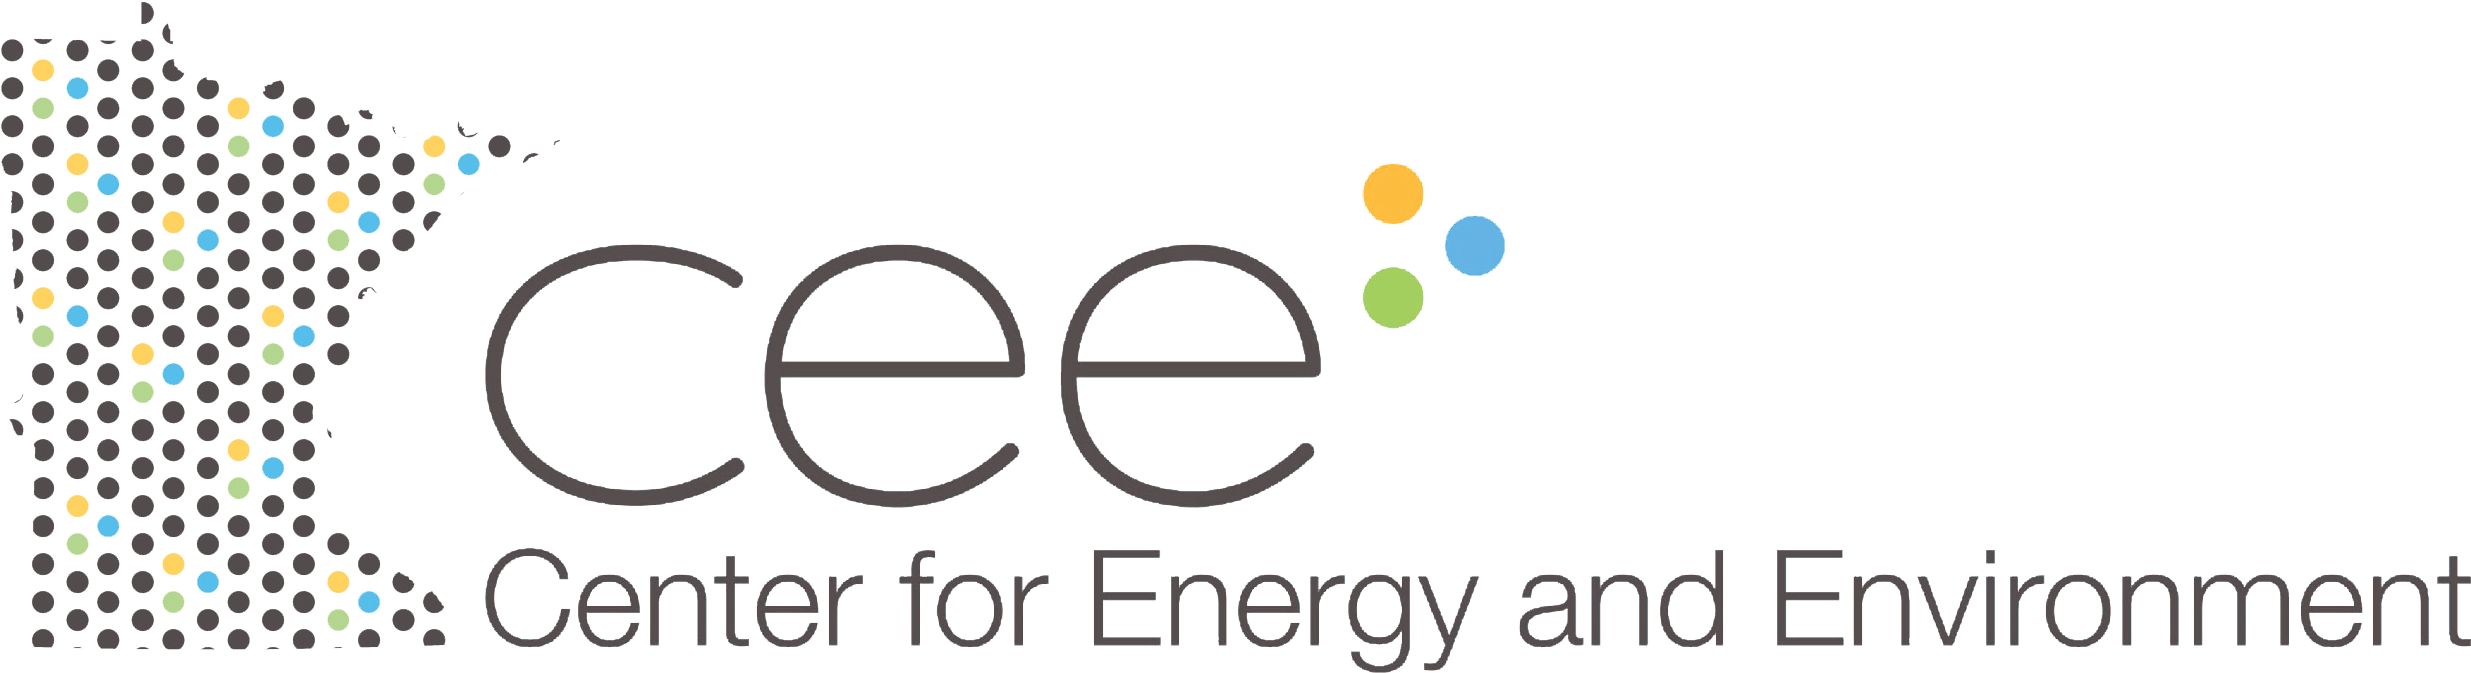 Center For Energy And Environment (2512x742), Png Download